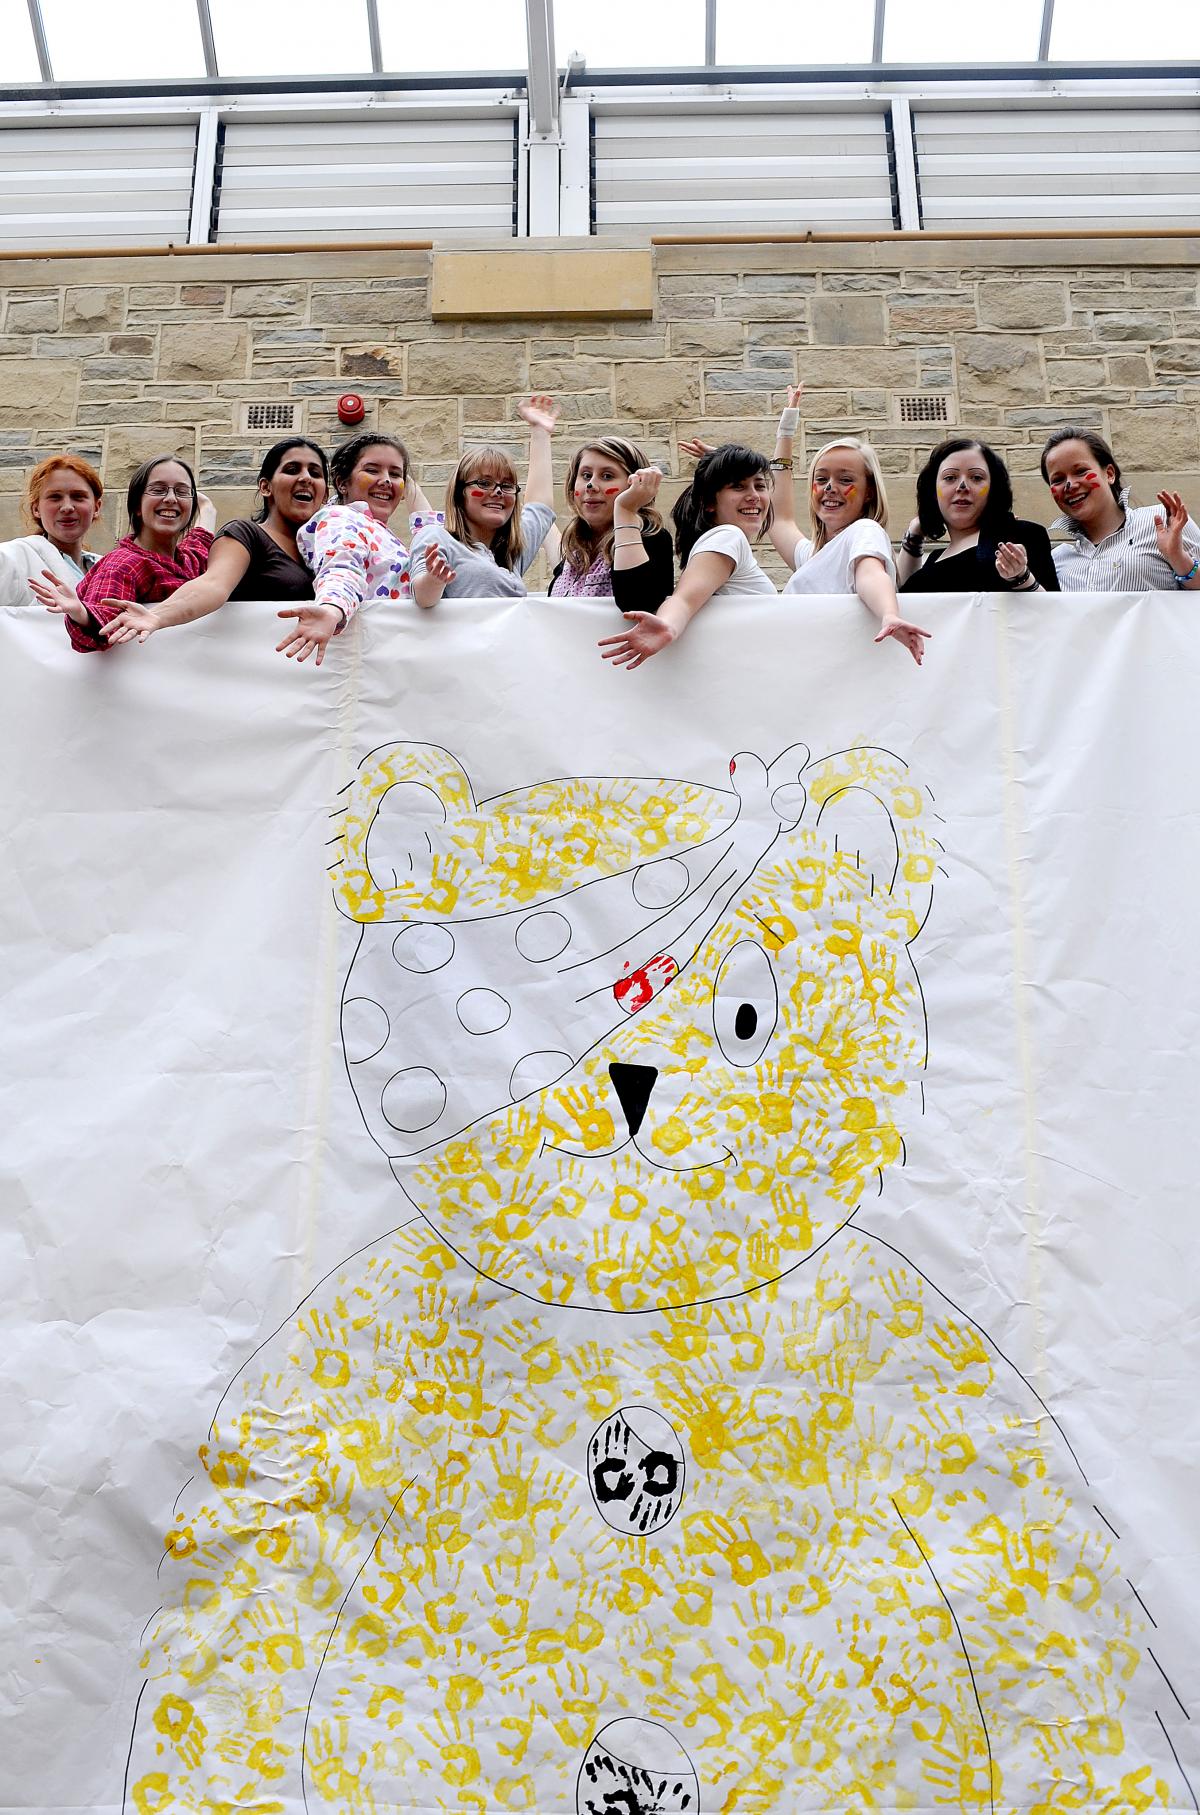 Pupils at The Girls Grammar School, Bradford, donned pyjamas to paint a giant picture of Pudsey Bear with their hands